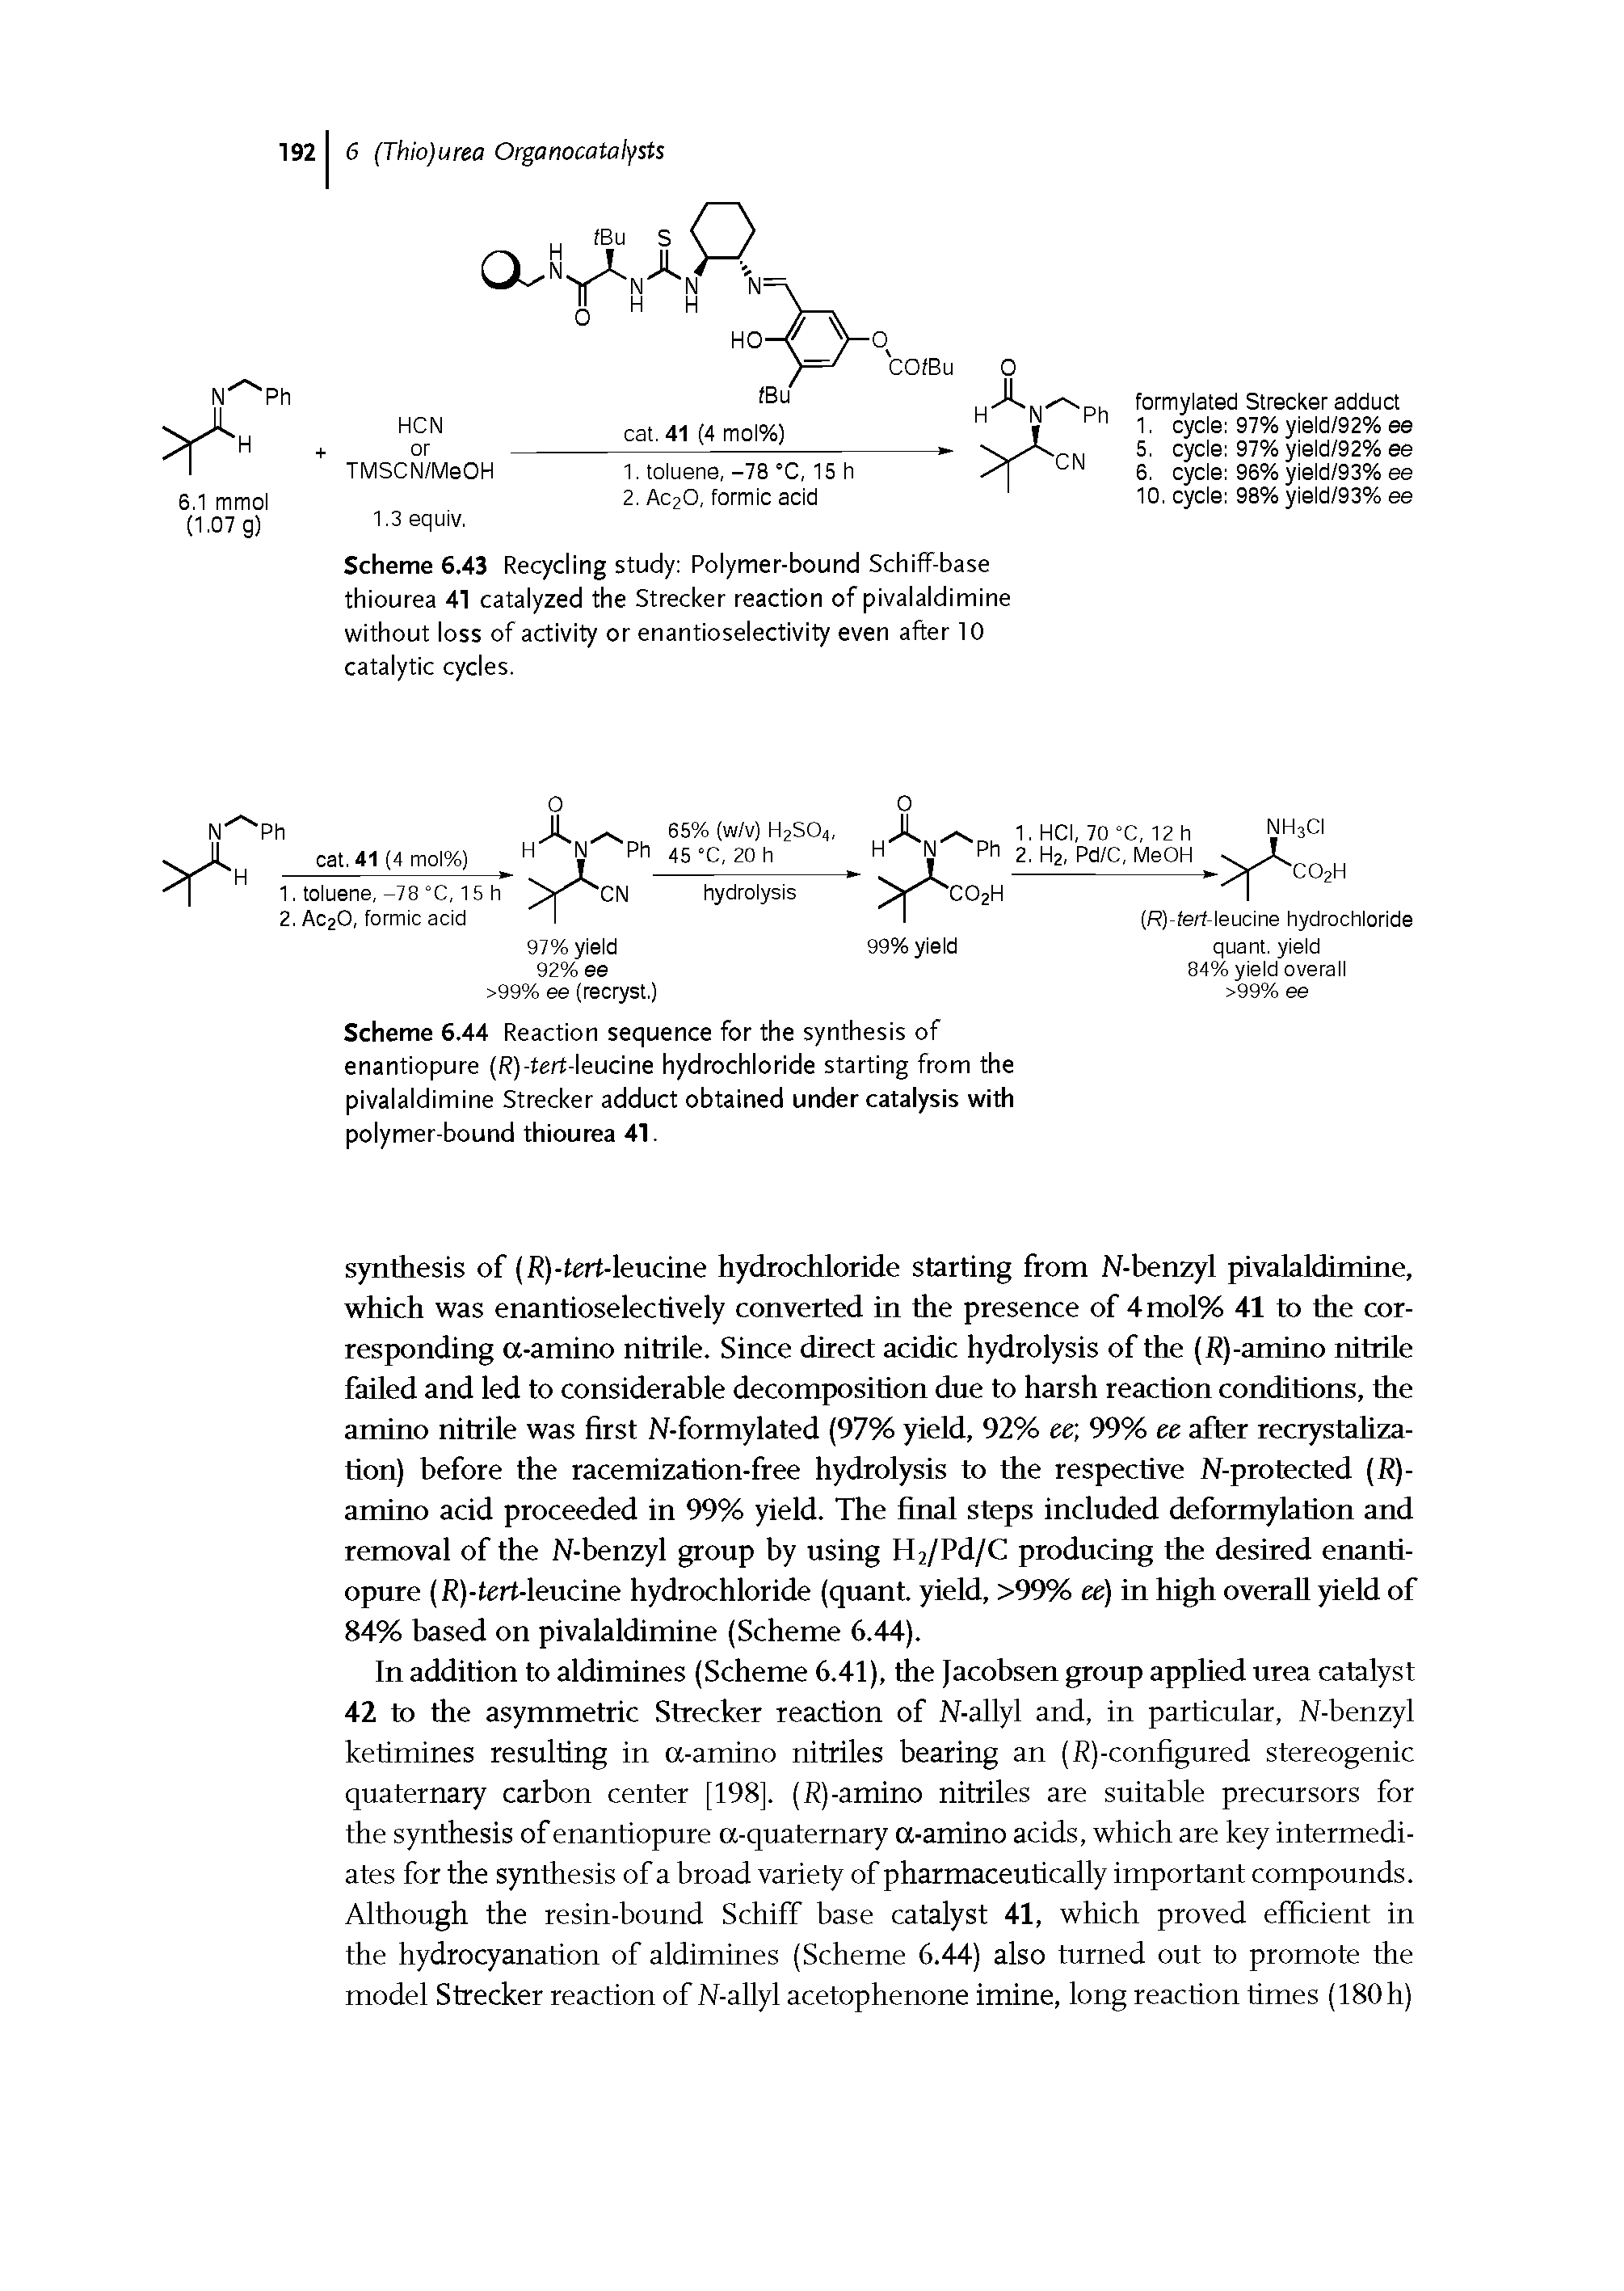 Scheme 6.43 Recycling study Polymer-bound Schiff-base thiourea 41 catalyzed the Strecker reaction of pivalaldimine without loss of activity or enantioselectivity even after 10 catalytic cycles.